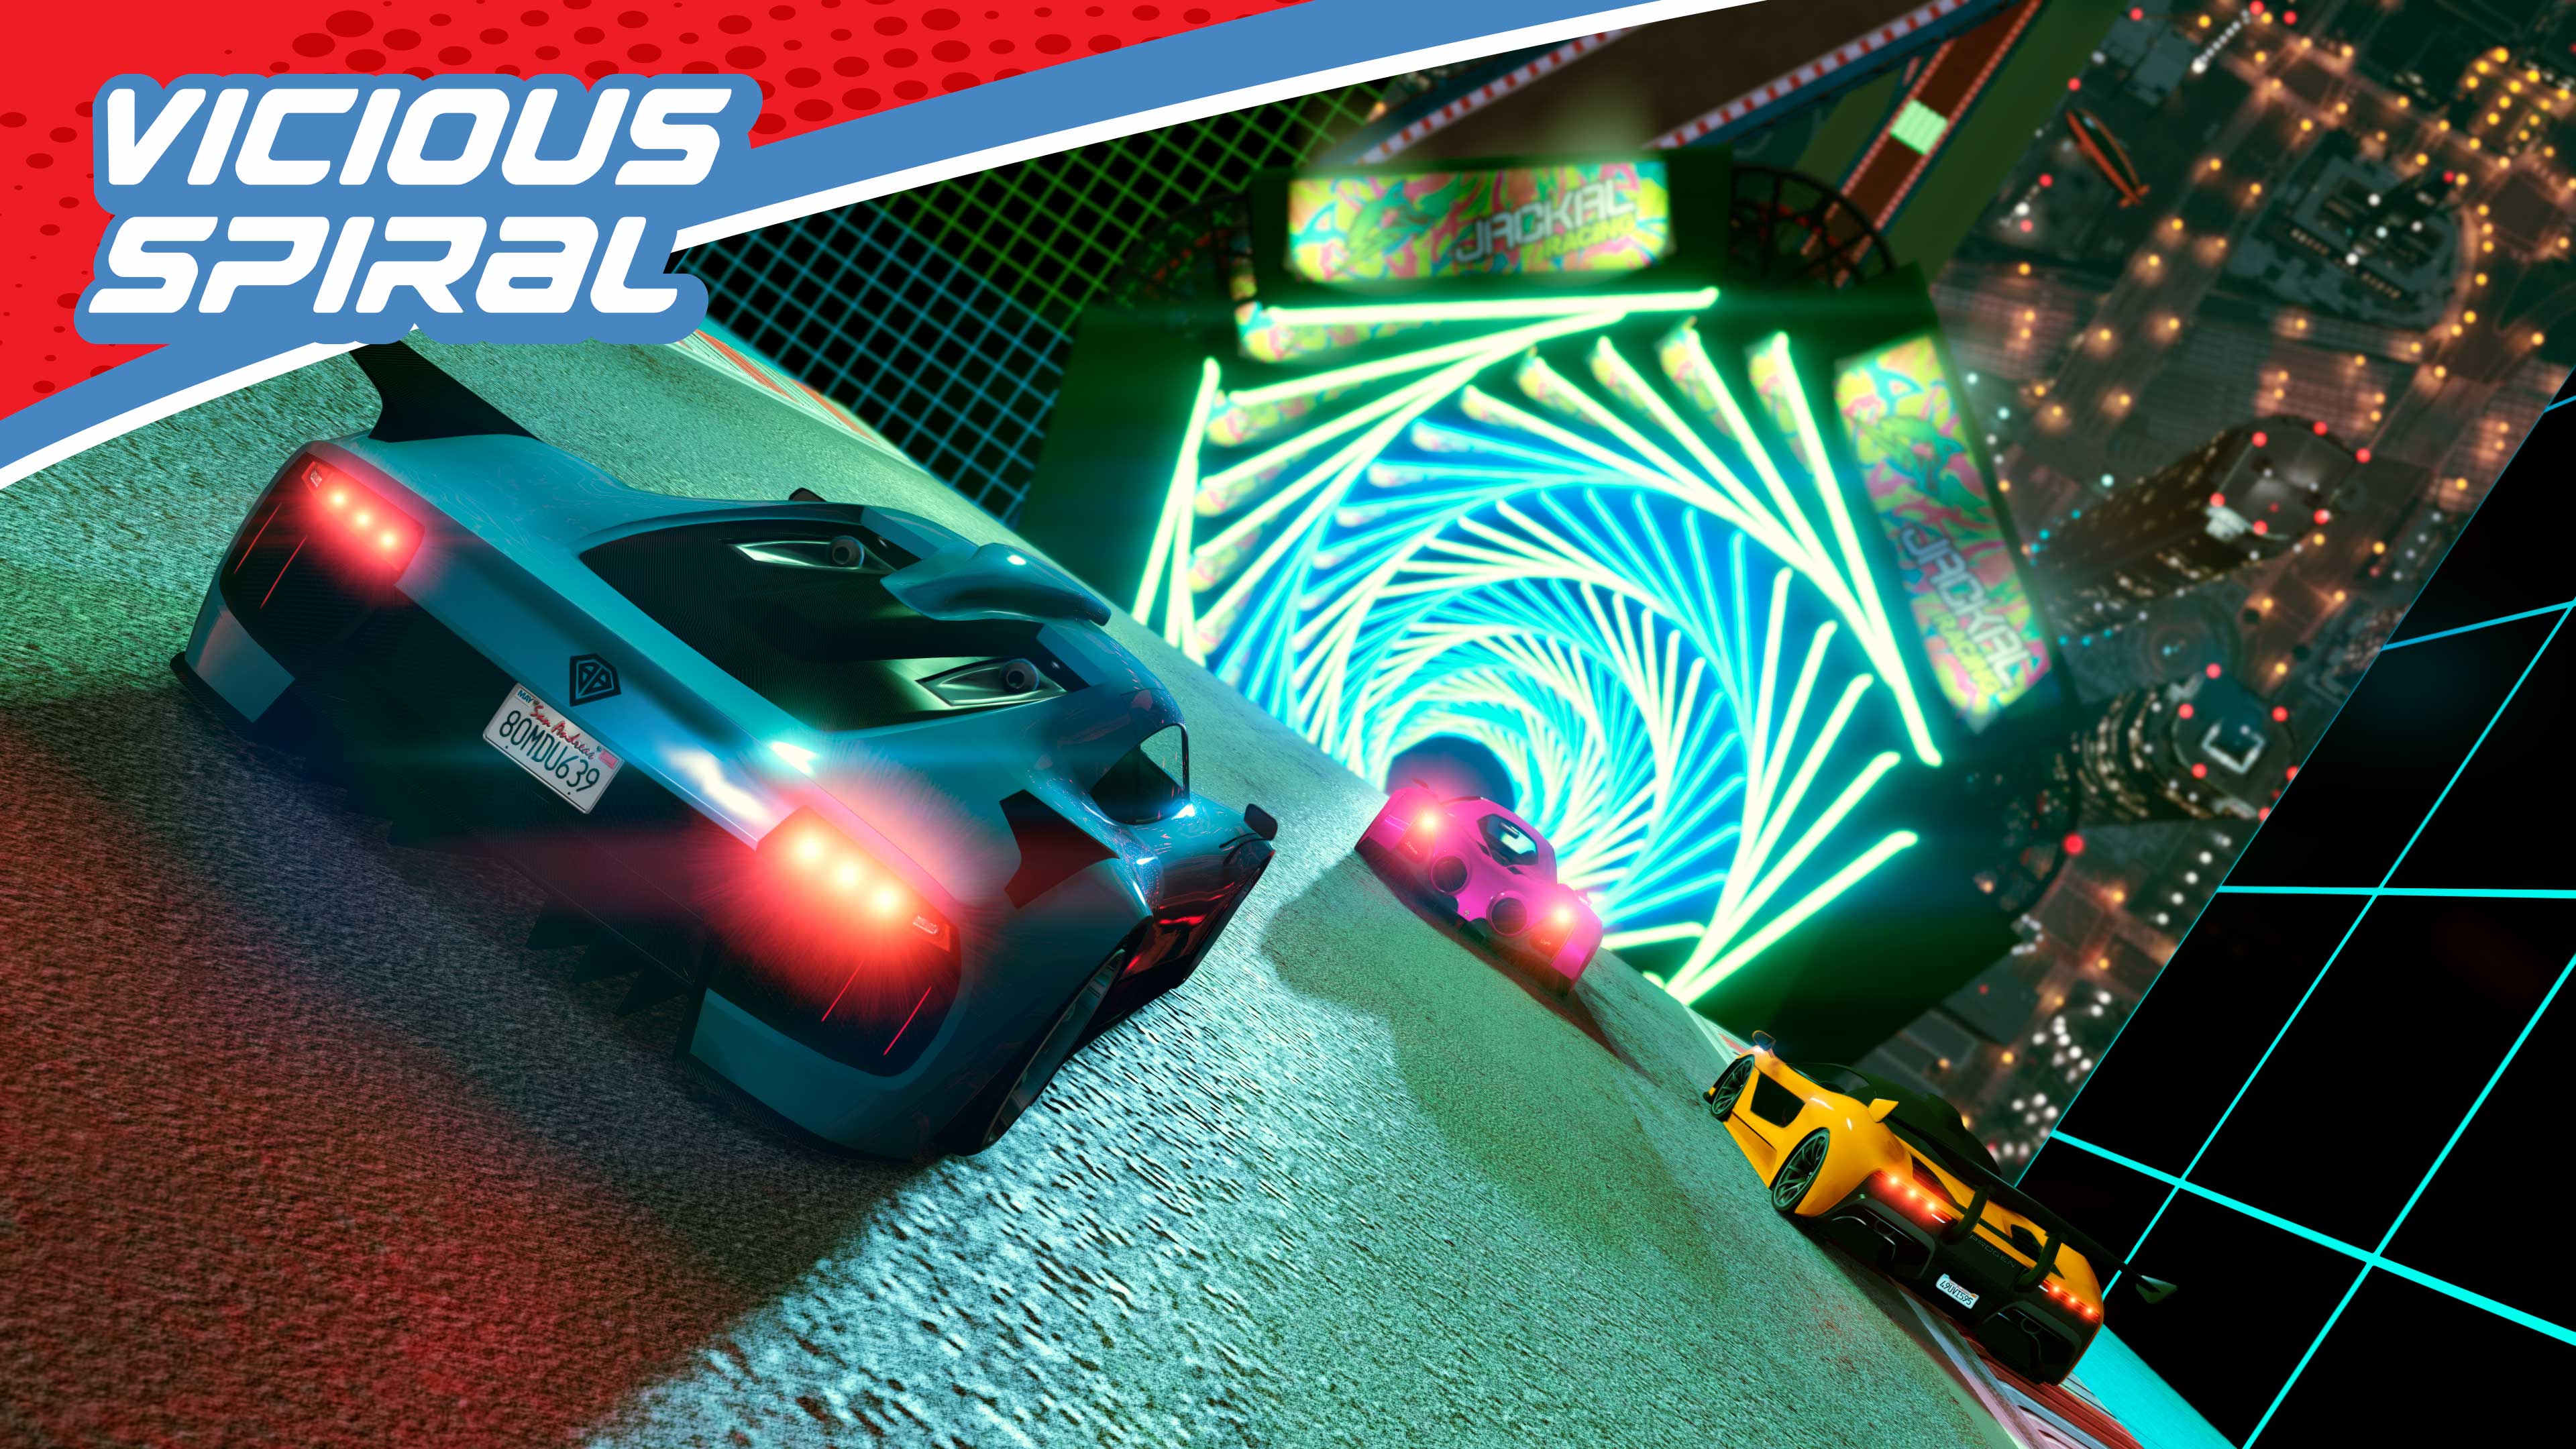 Play Stunt Race GTA V style, a game of Grand Theft Auto